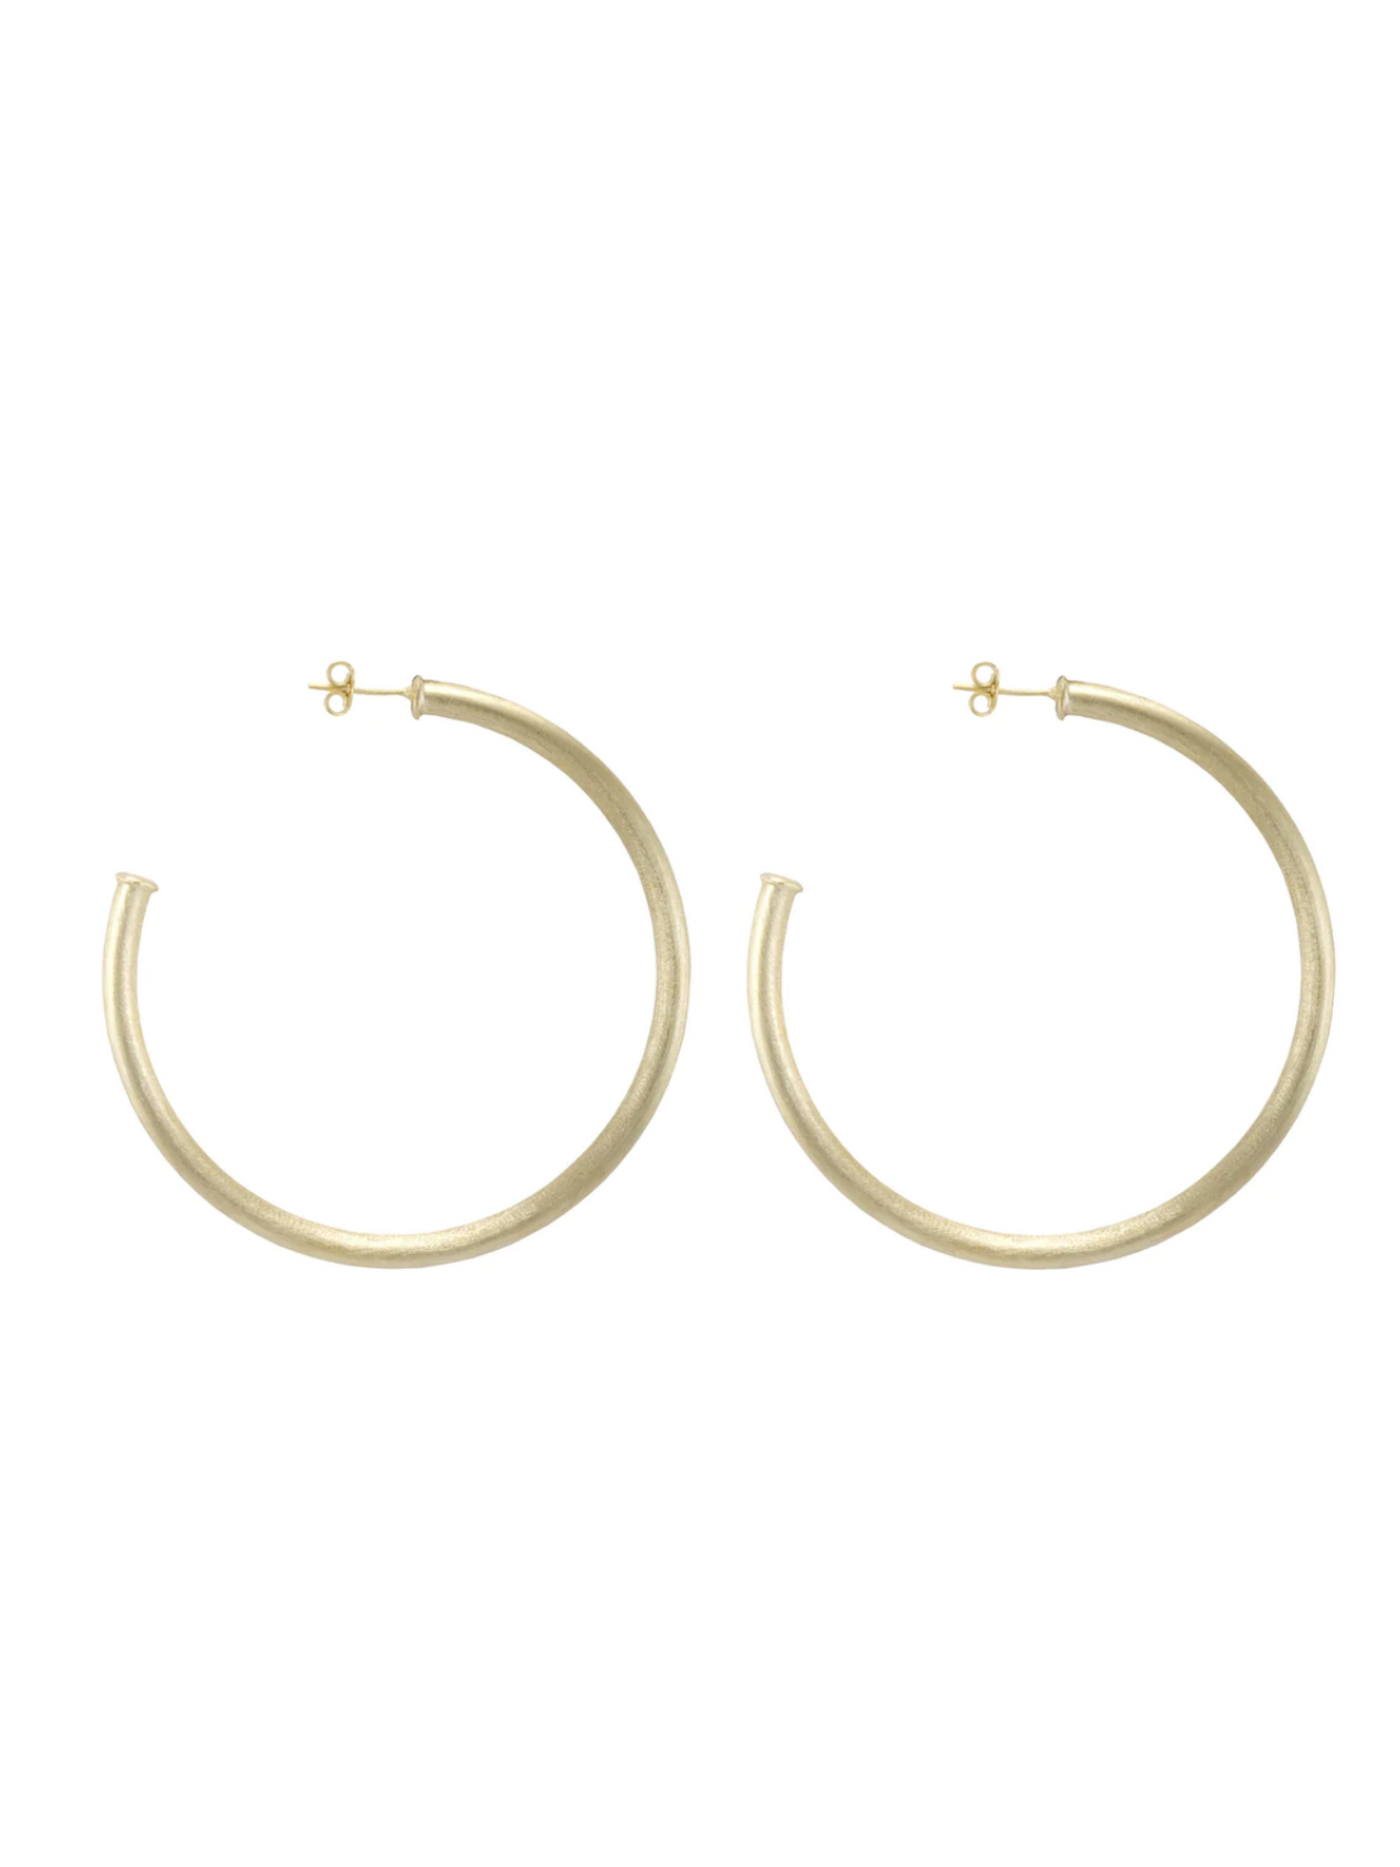 Shelia Fajl Everybody's Favorite Hoops in brushed Gold on white background.